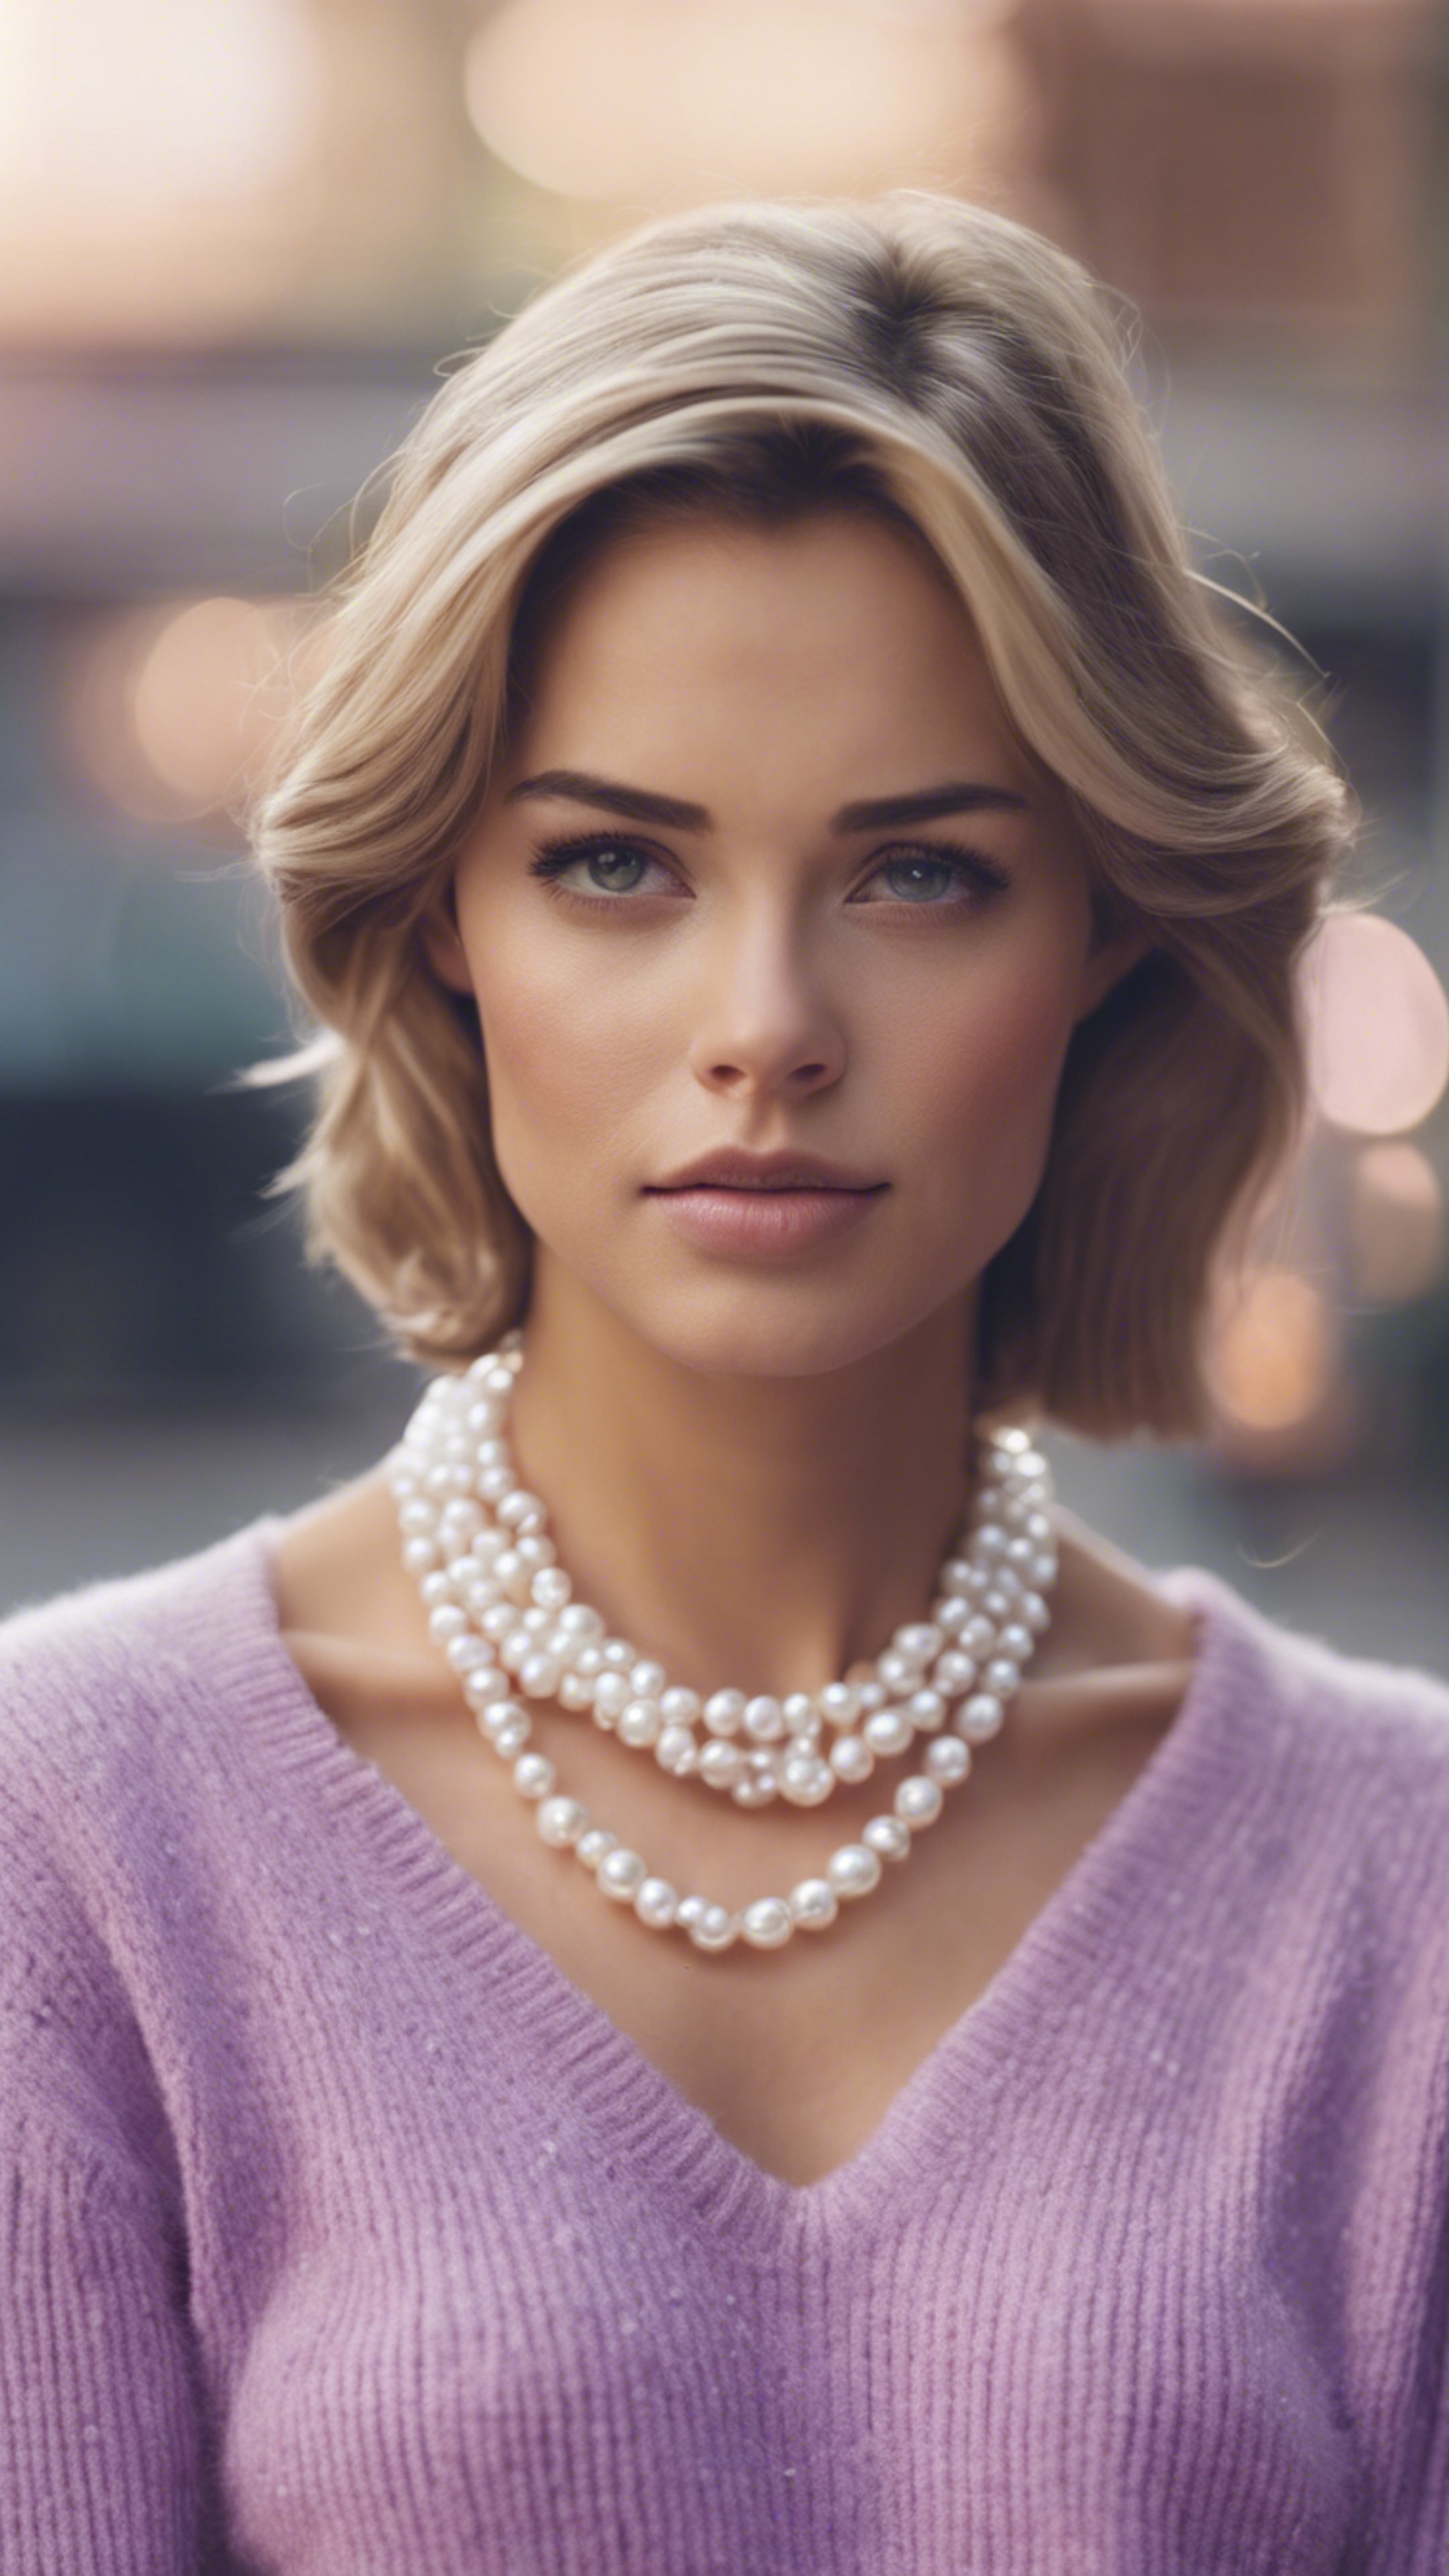 A stylish preppy woman wearing a pastel purple cashmere sweater and pearl necklace. Валлпапер[eff5c75e56ed424daf90]